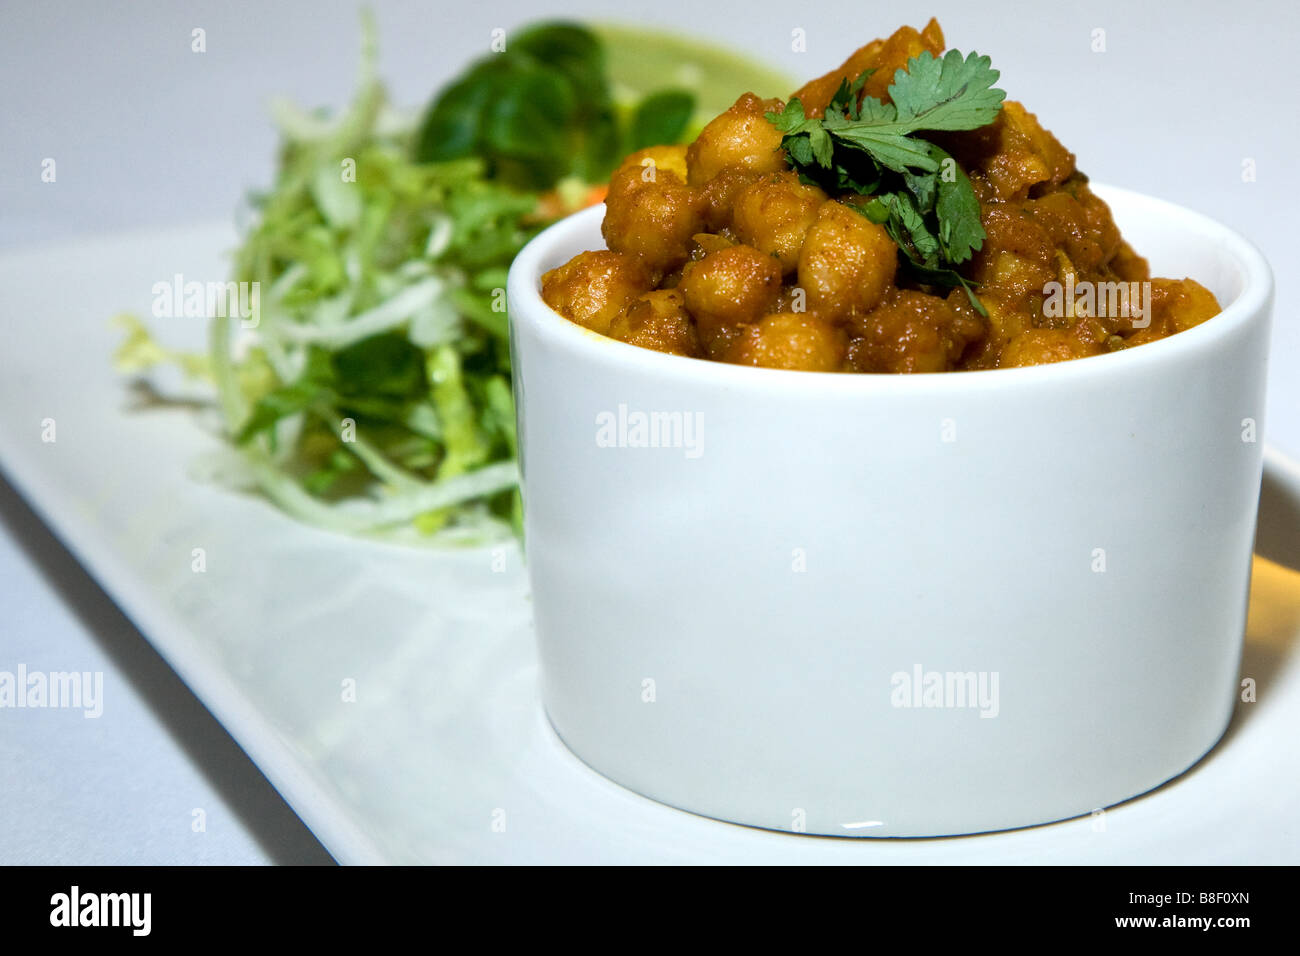 Chick pea curry Indian food dish Stock Photo